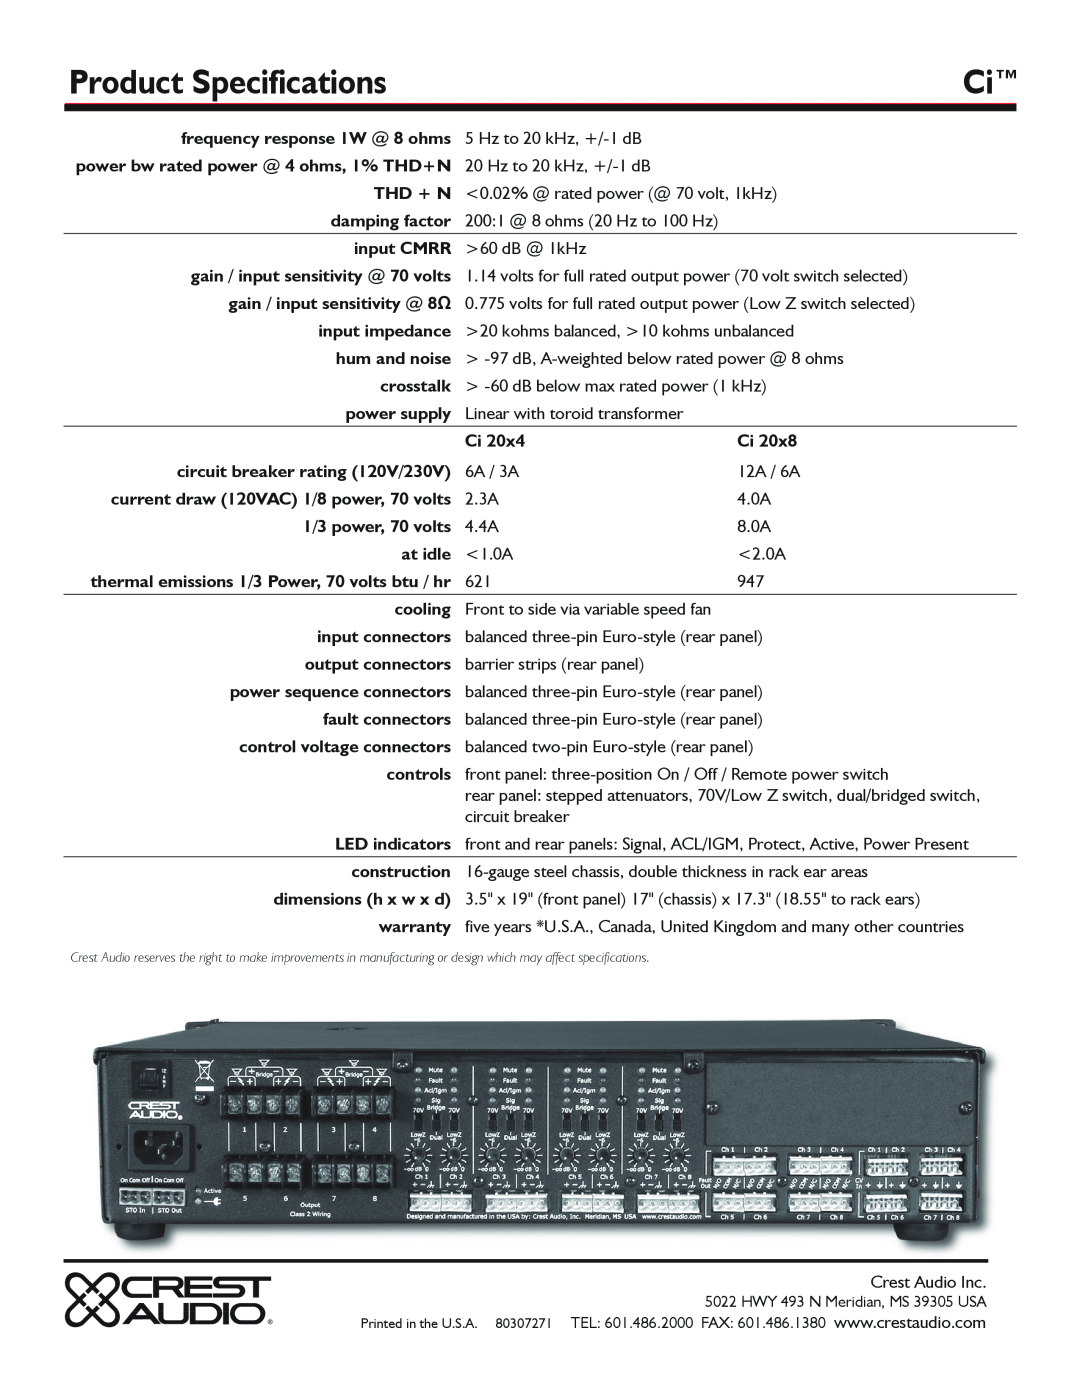 Crest Audio Ci 20 X 4, Ci 20 X 8 manual Product Specifications 